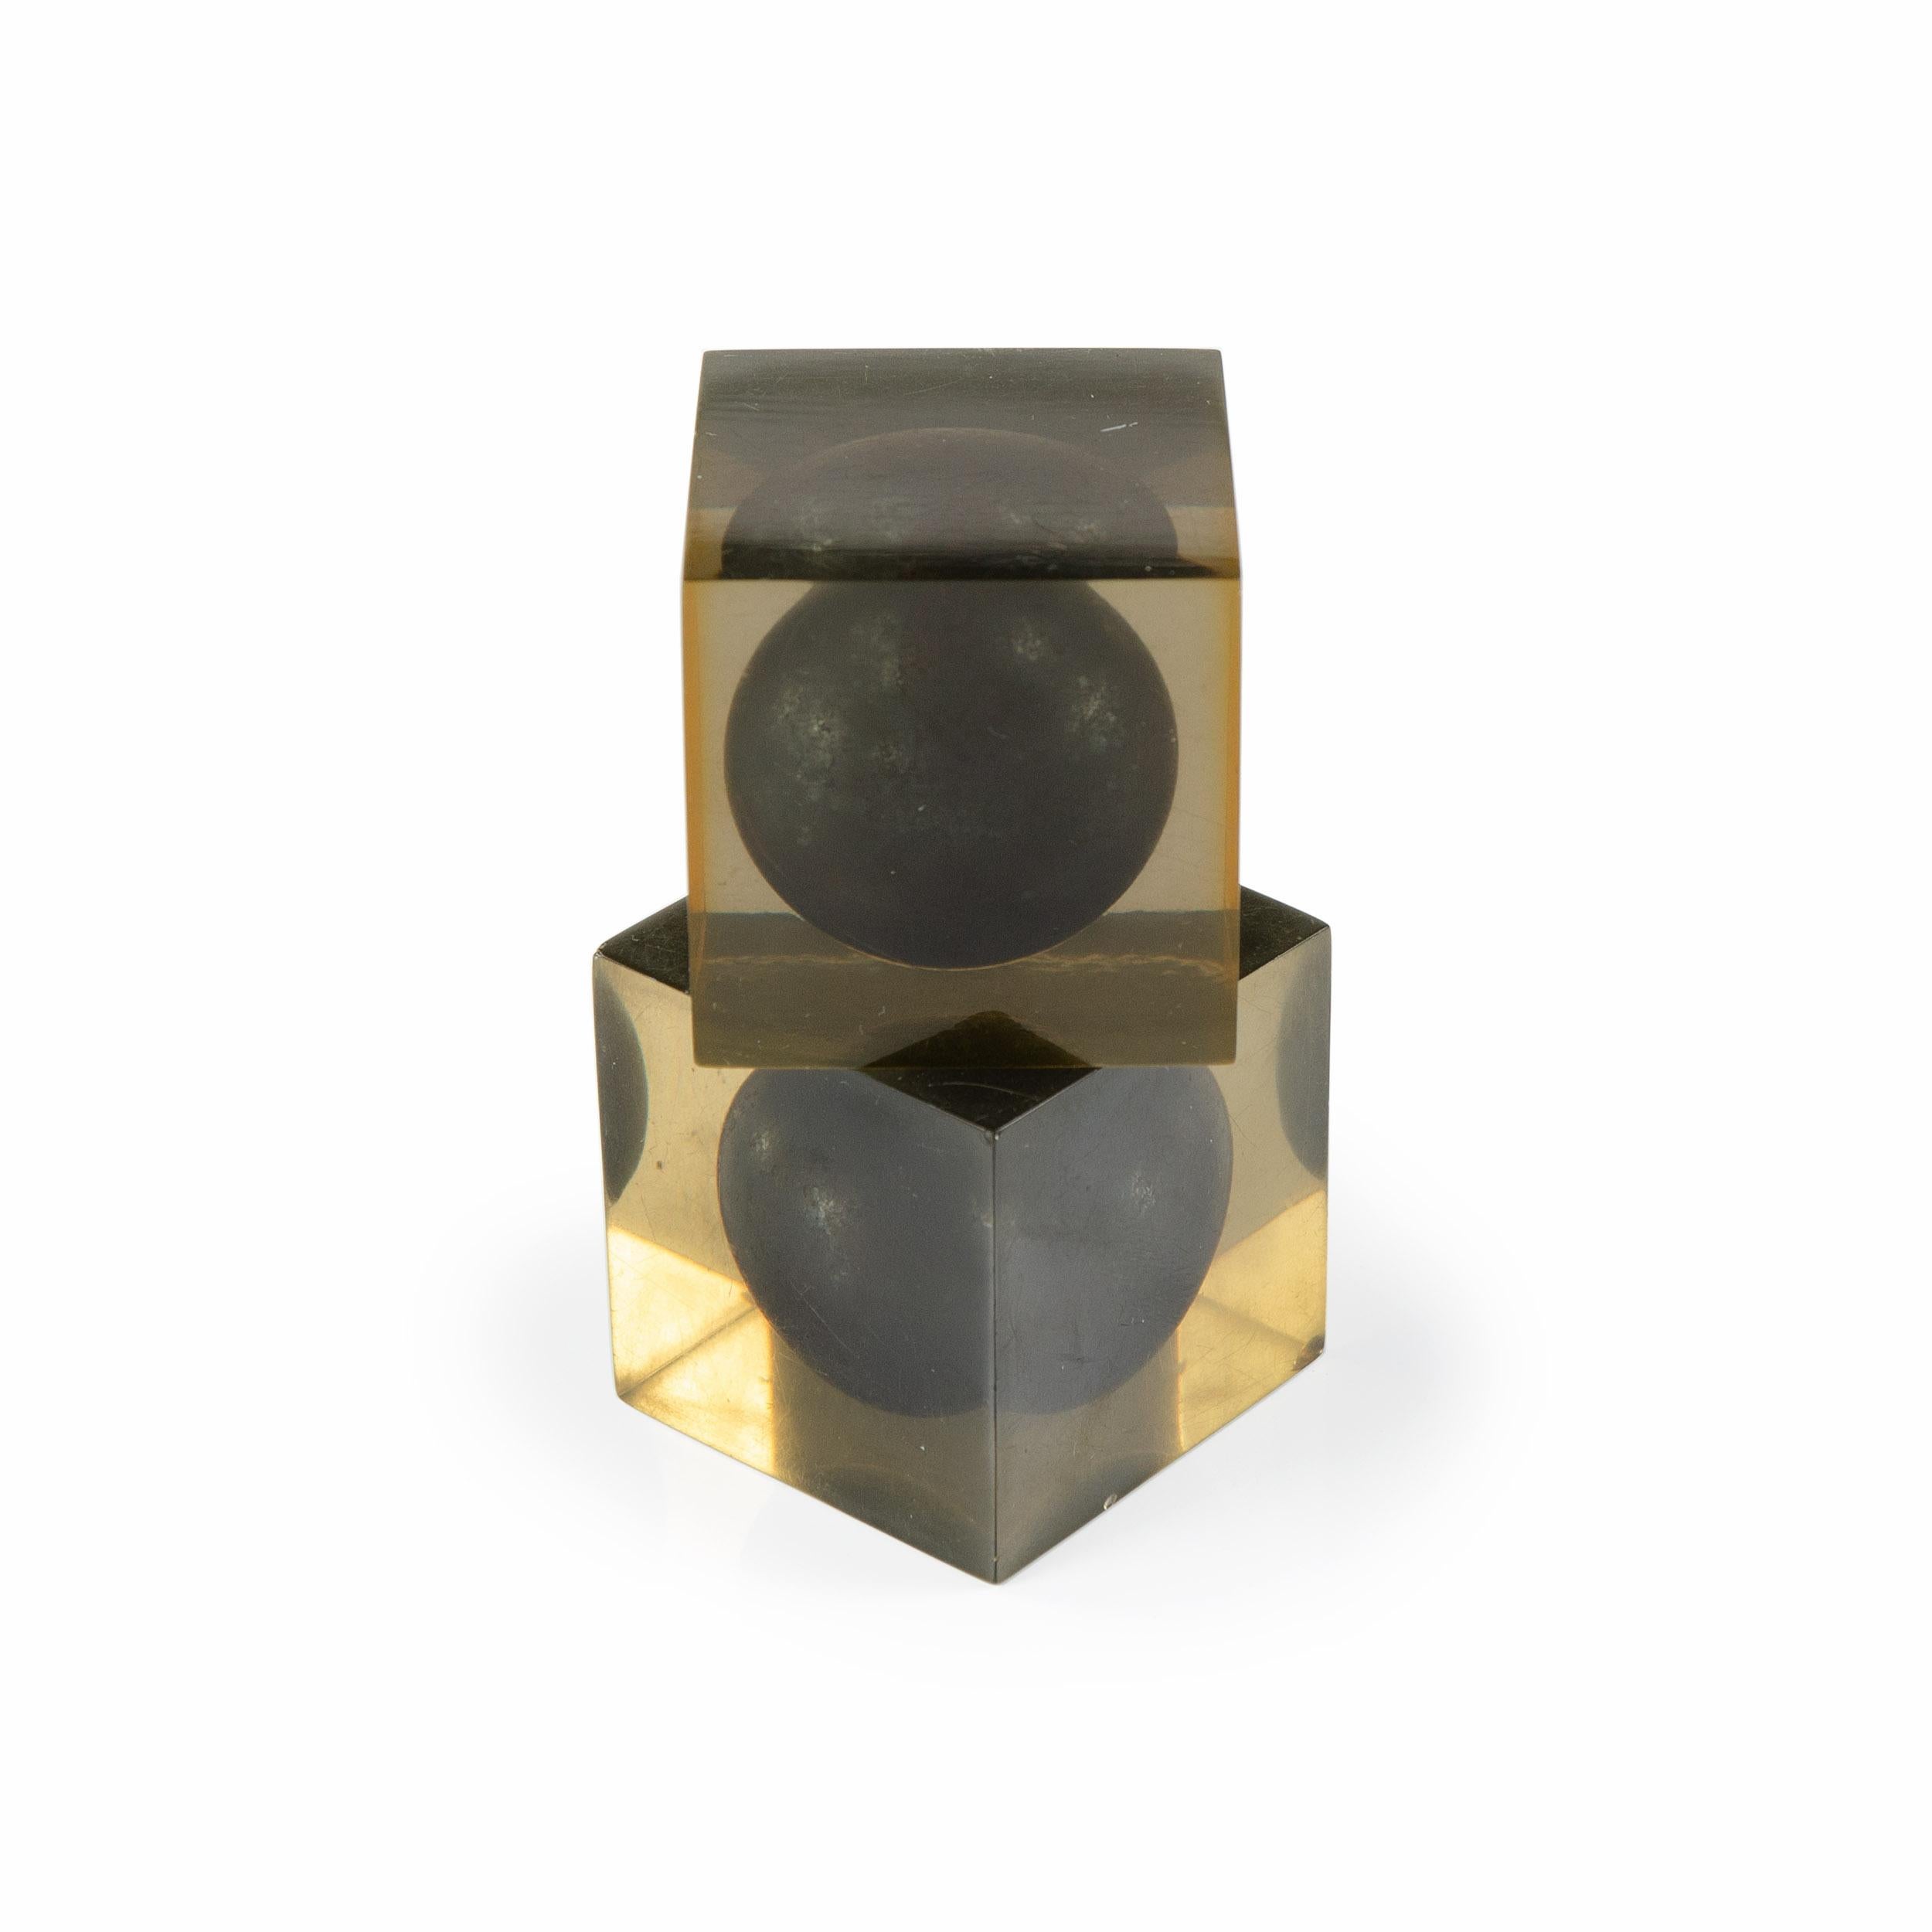 Two resin cubes, each containing a sphere, designed by Enzo Mari. Made in Italy by Danese Milano, 1950s.